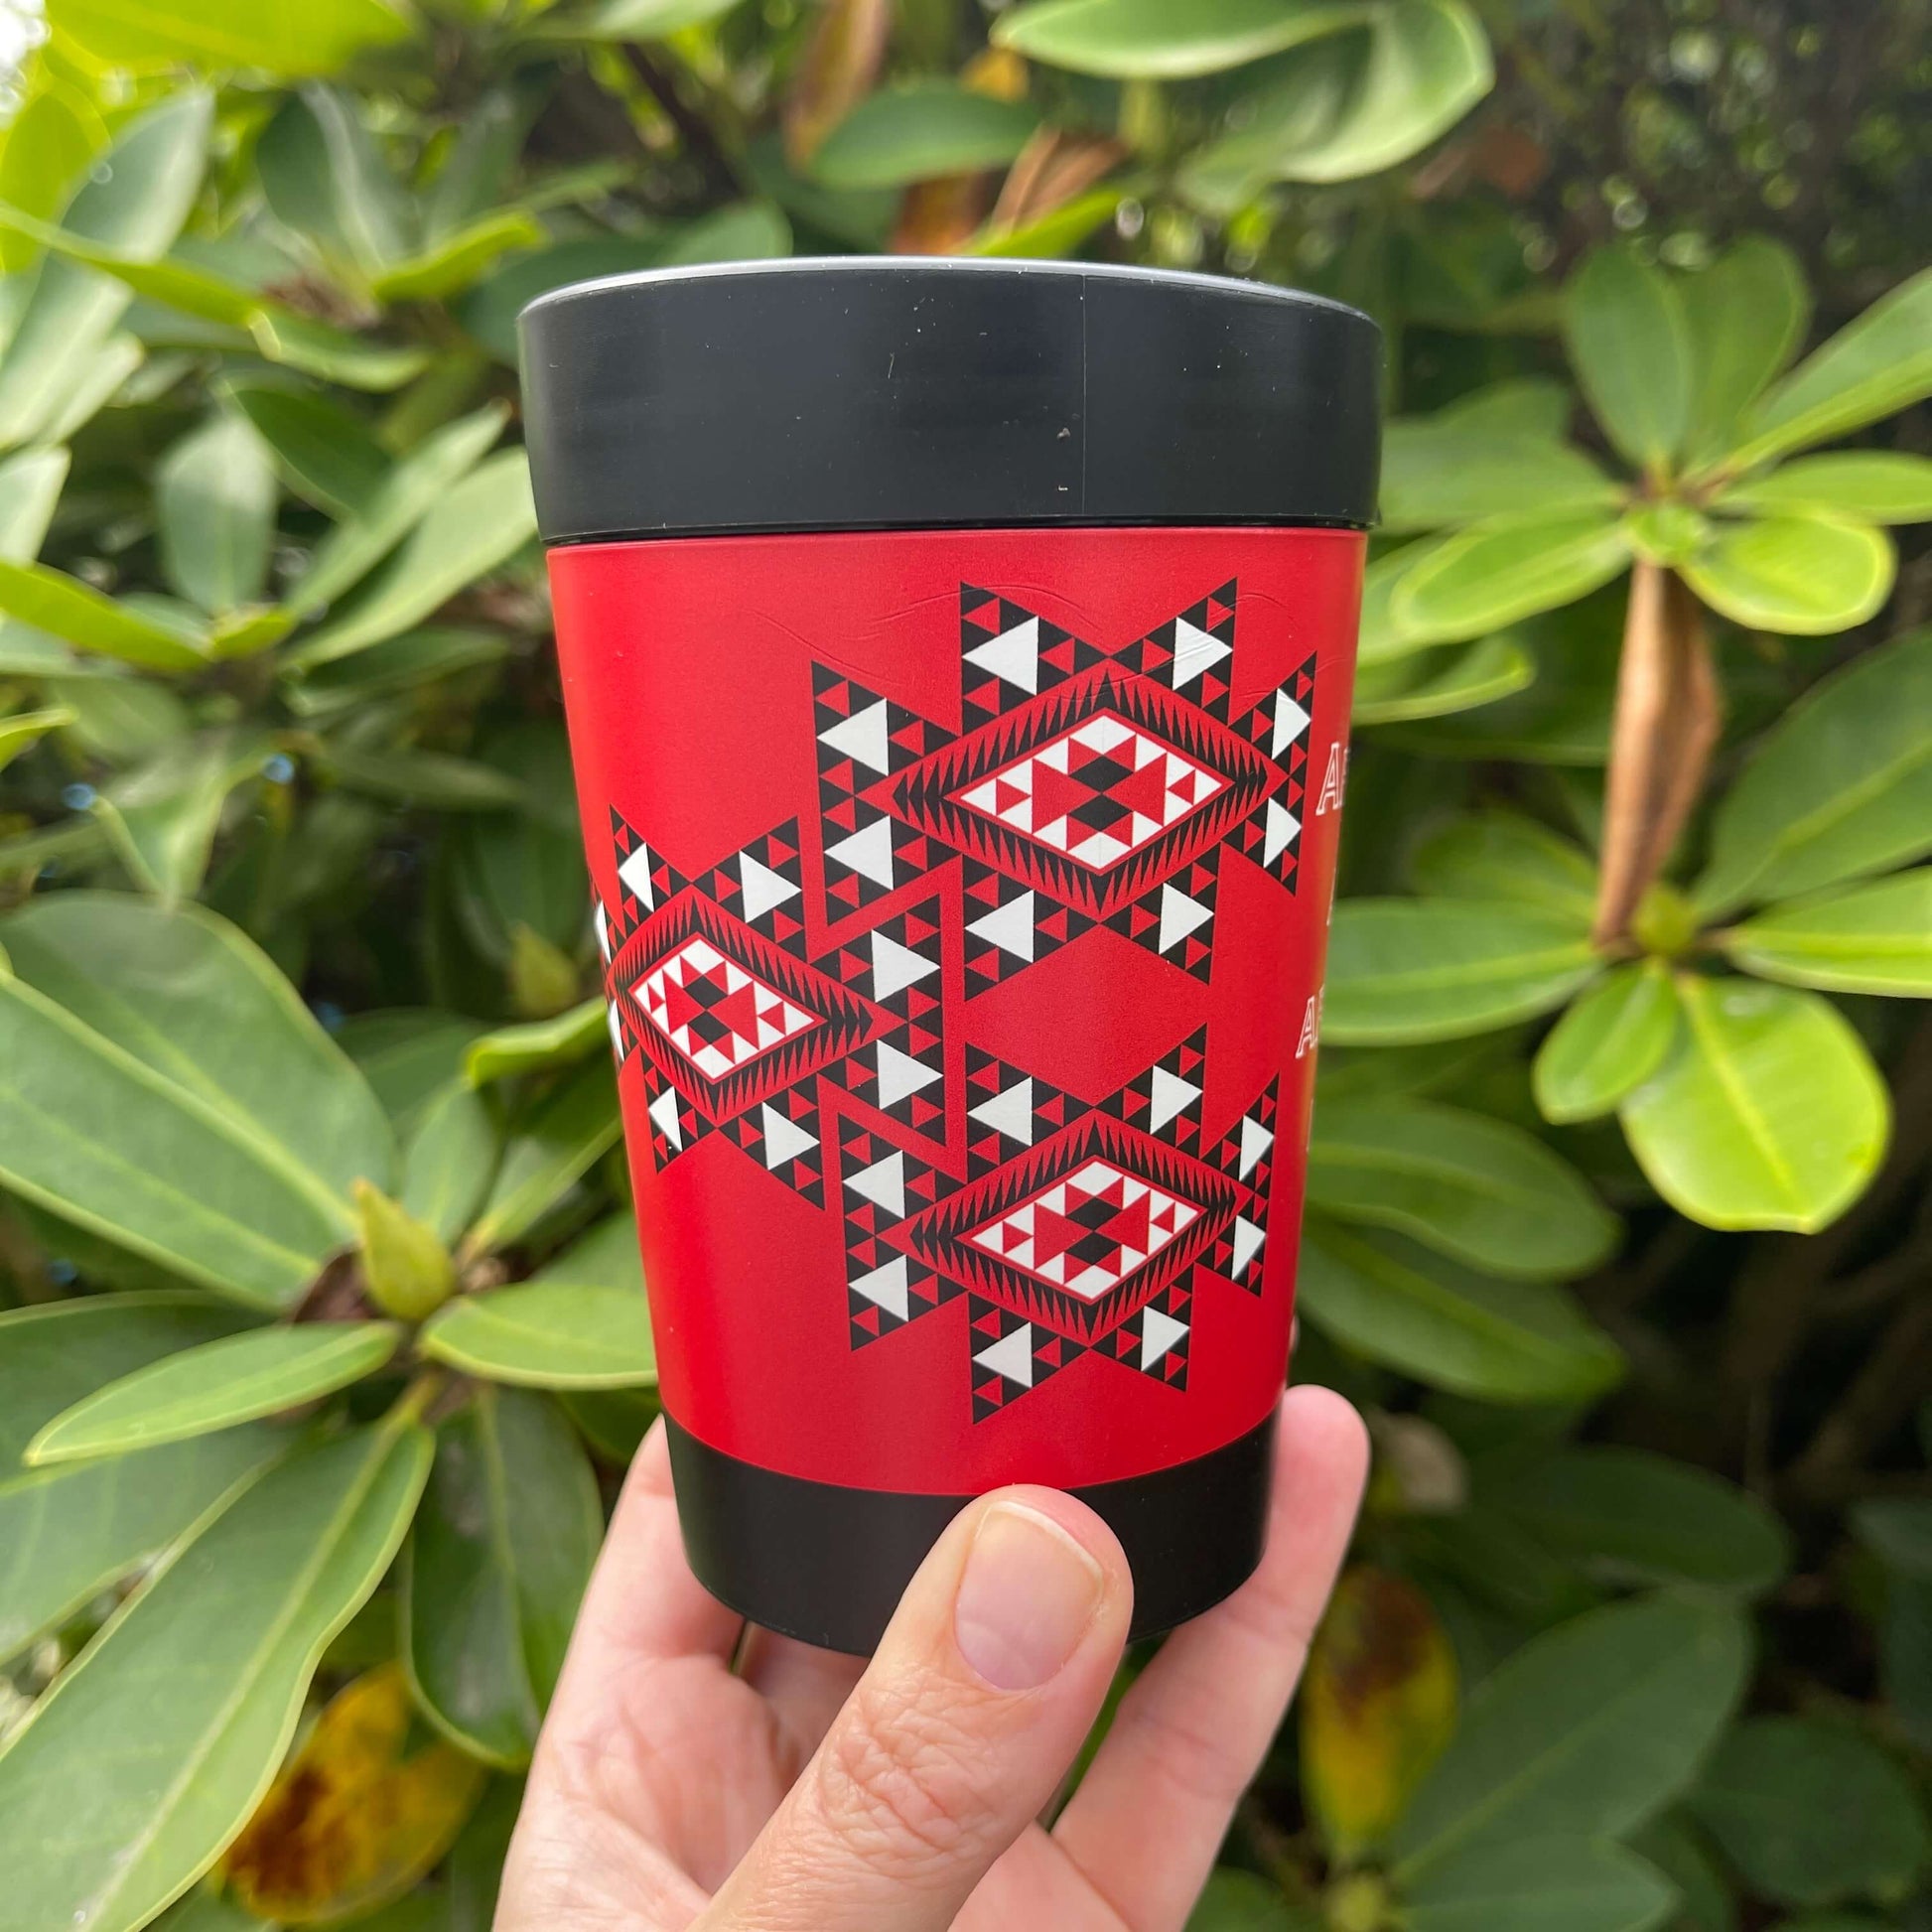 Reusable coffee cup in black with red, white and black wrapped image featuring Maori patterns.